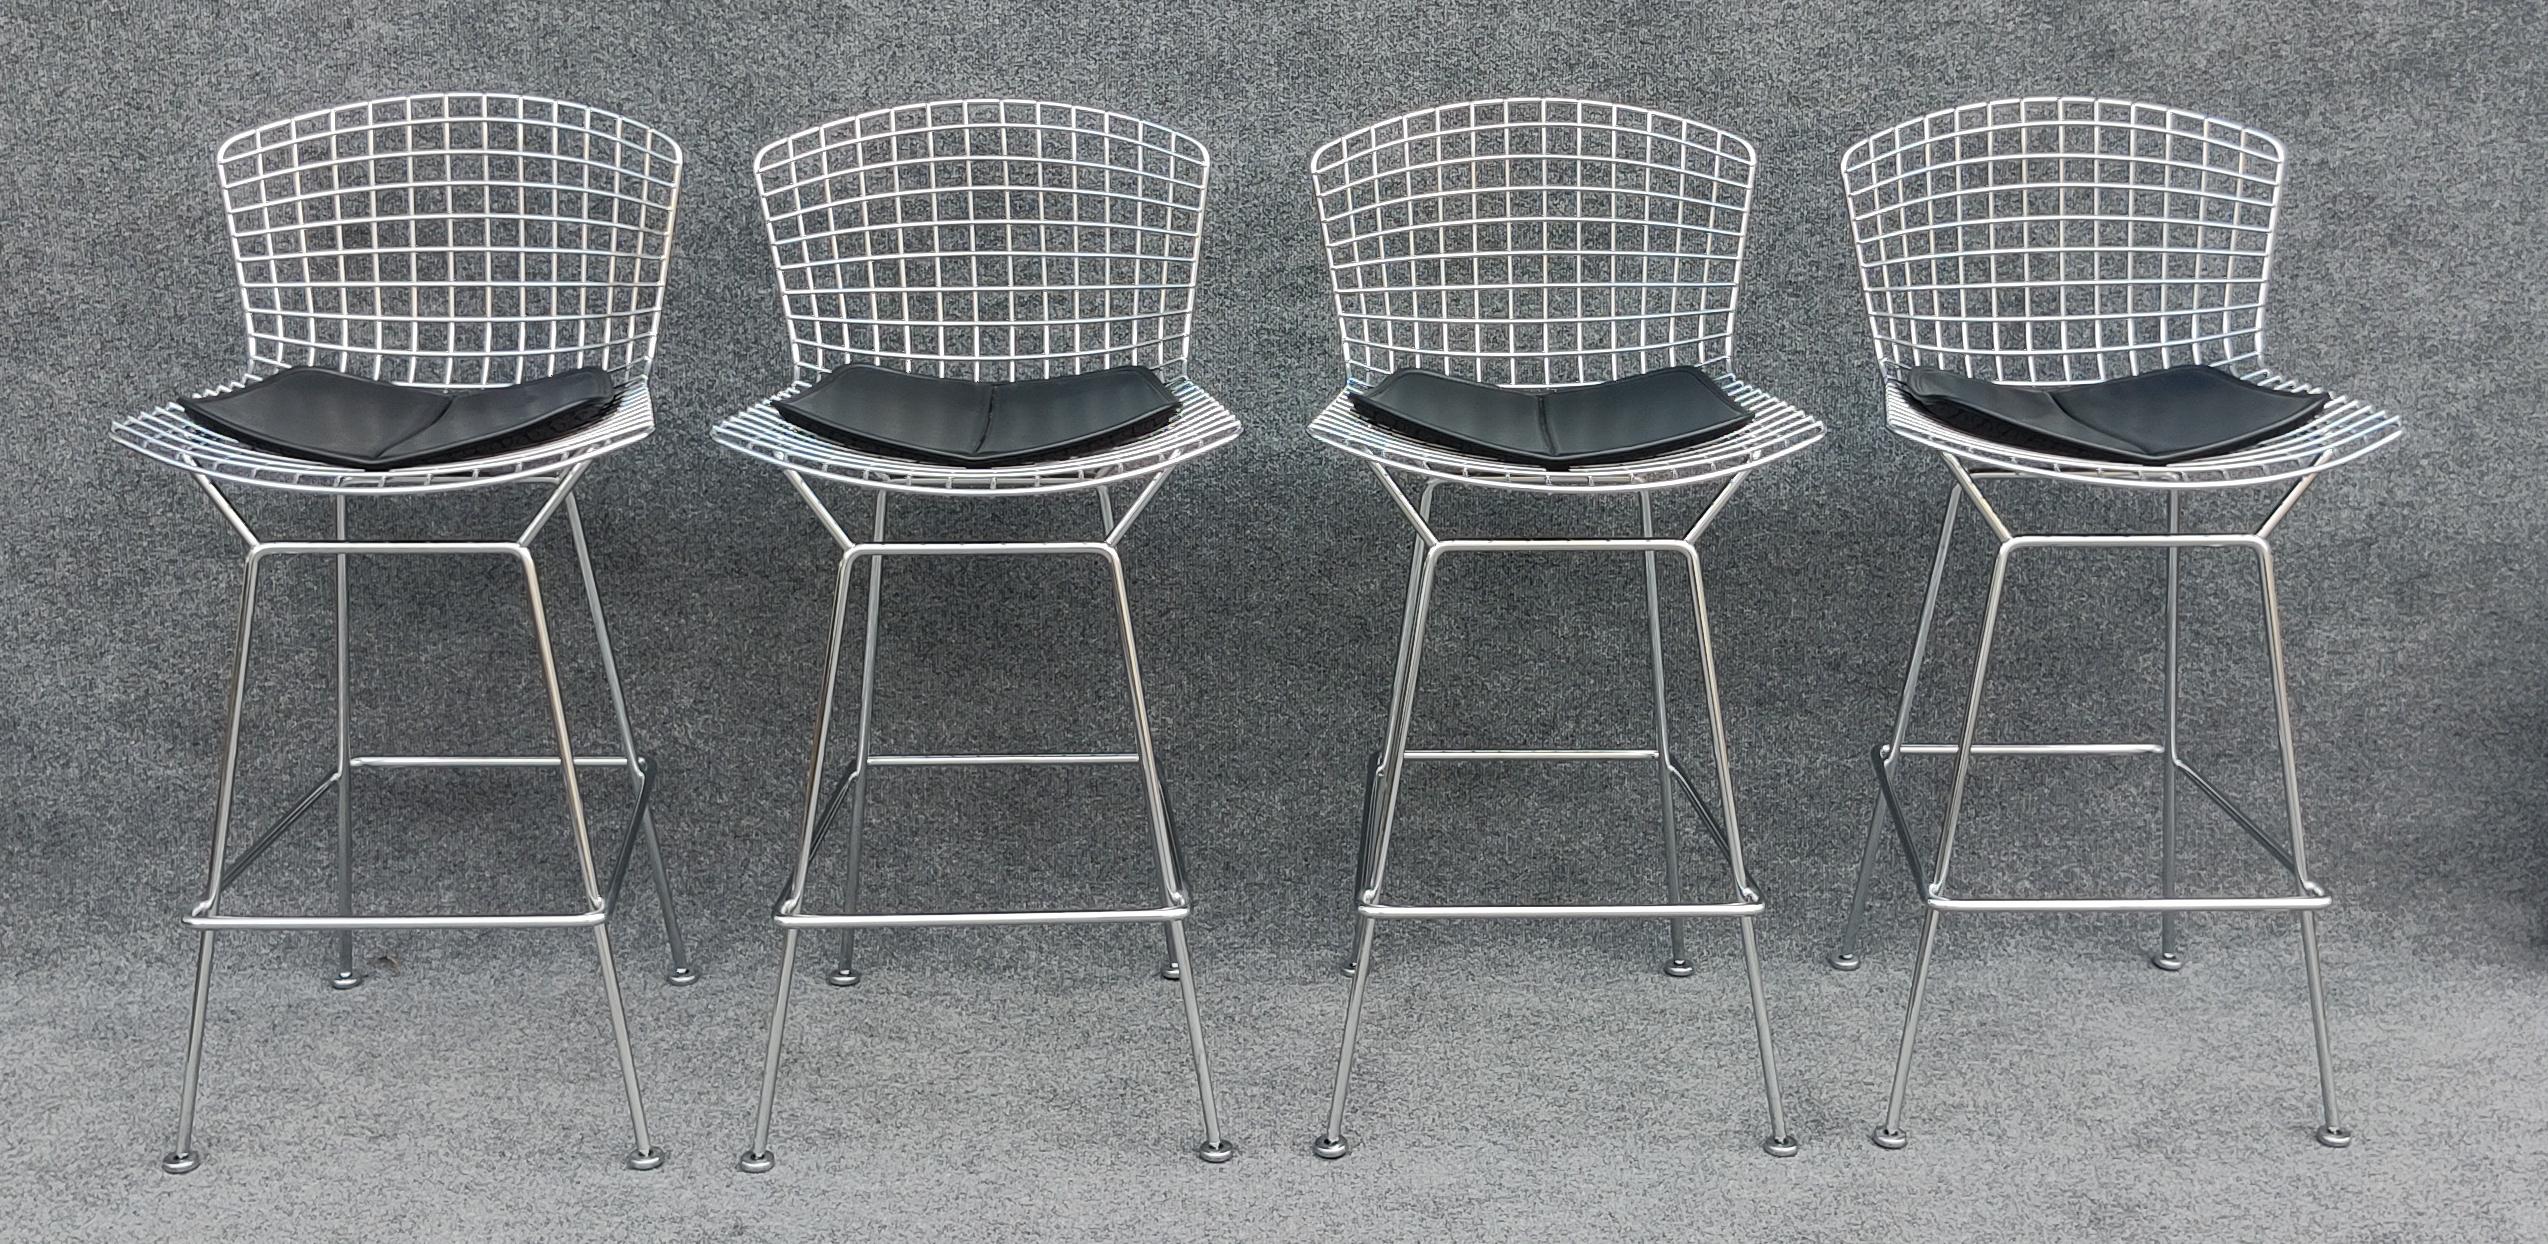 Deisgned in the early 1950s by genius up-and-coming designer Harry Bertoia, this chair stands today as part of an entire line produced by Knoll. Accompanied by Bertoia's Diamond chair, Bird chair, and many others, this iconic chair was described by